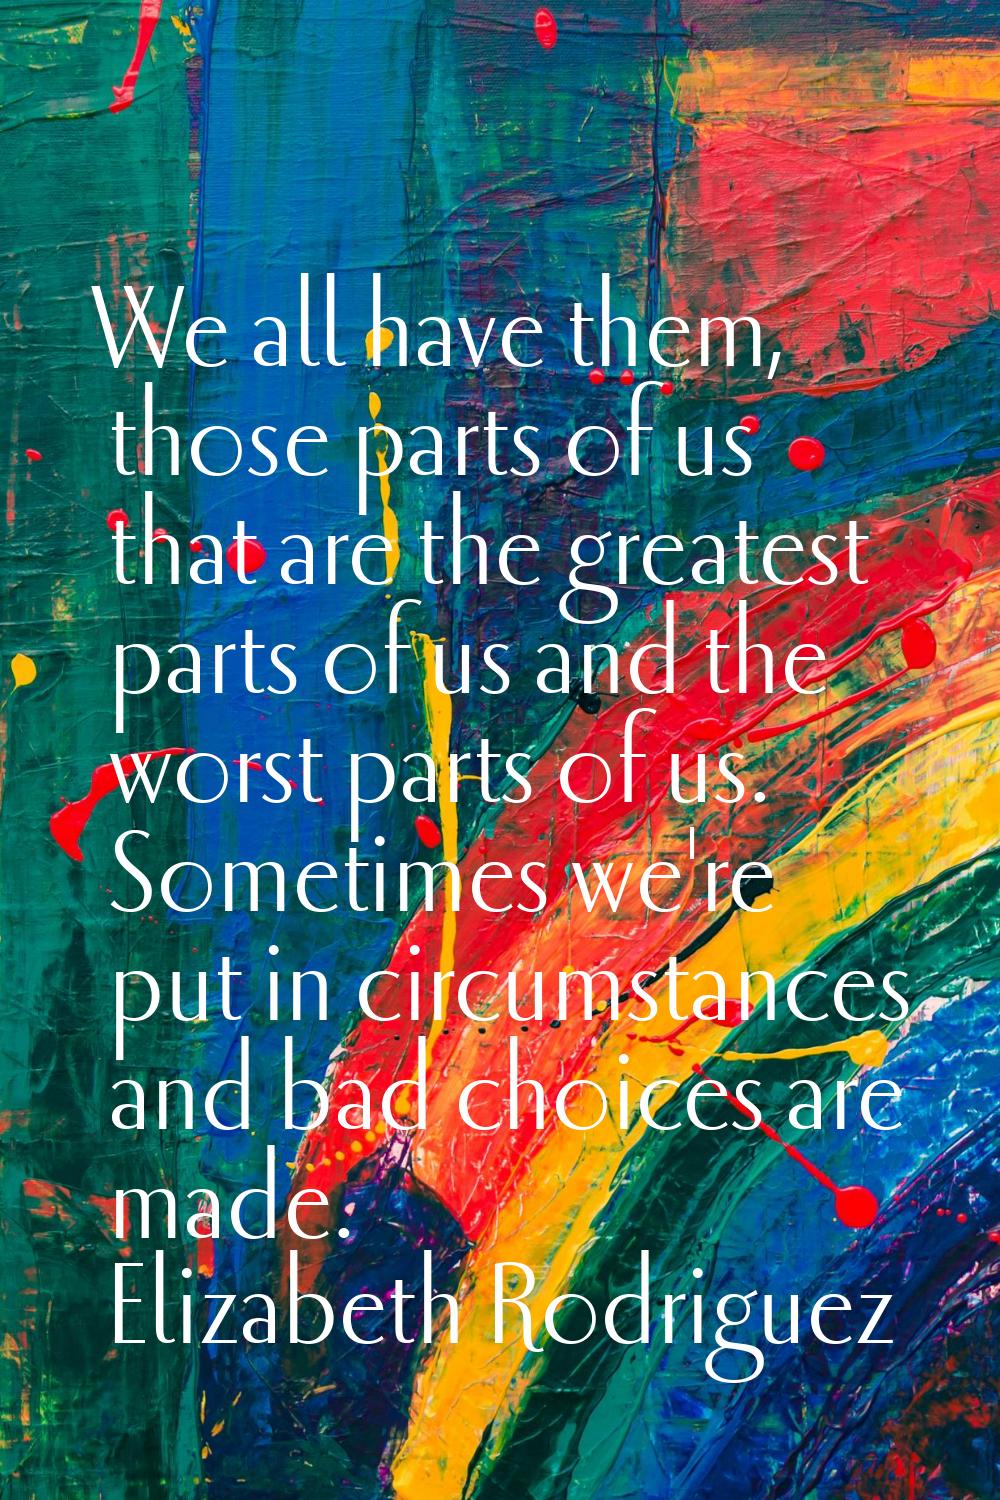 We all have them, those parts of us that are the greatest parts of us and the worst parts of us. So